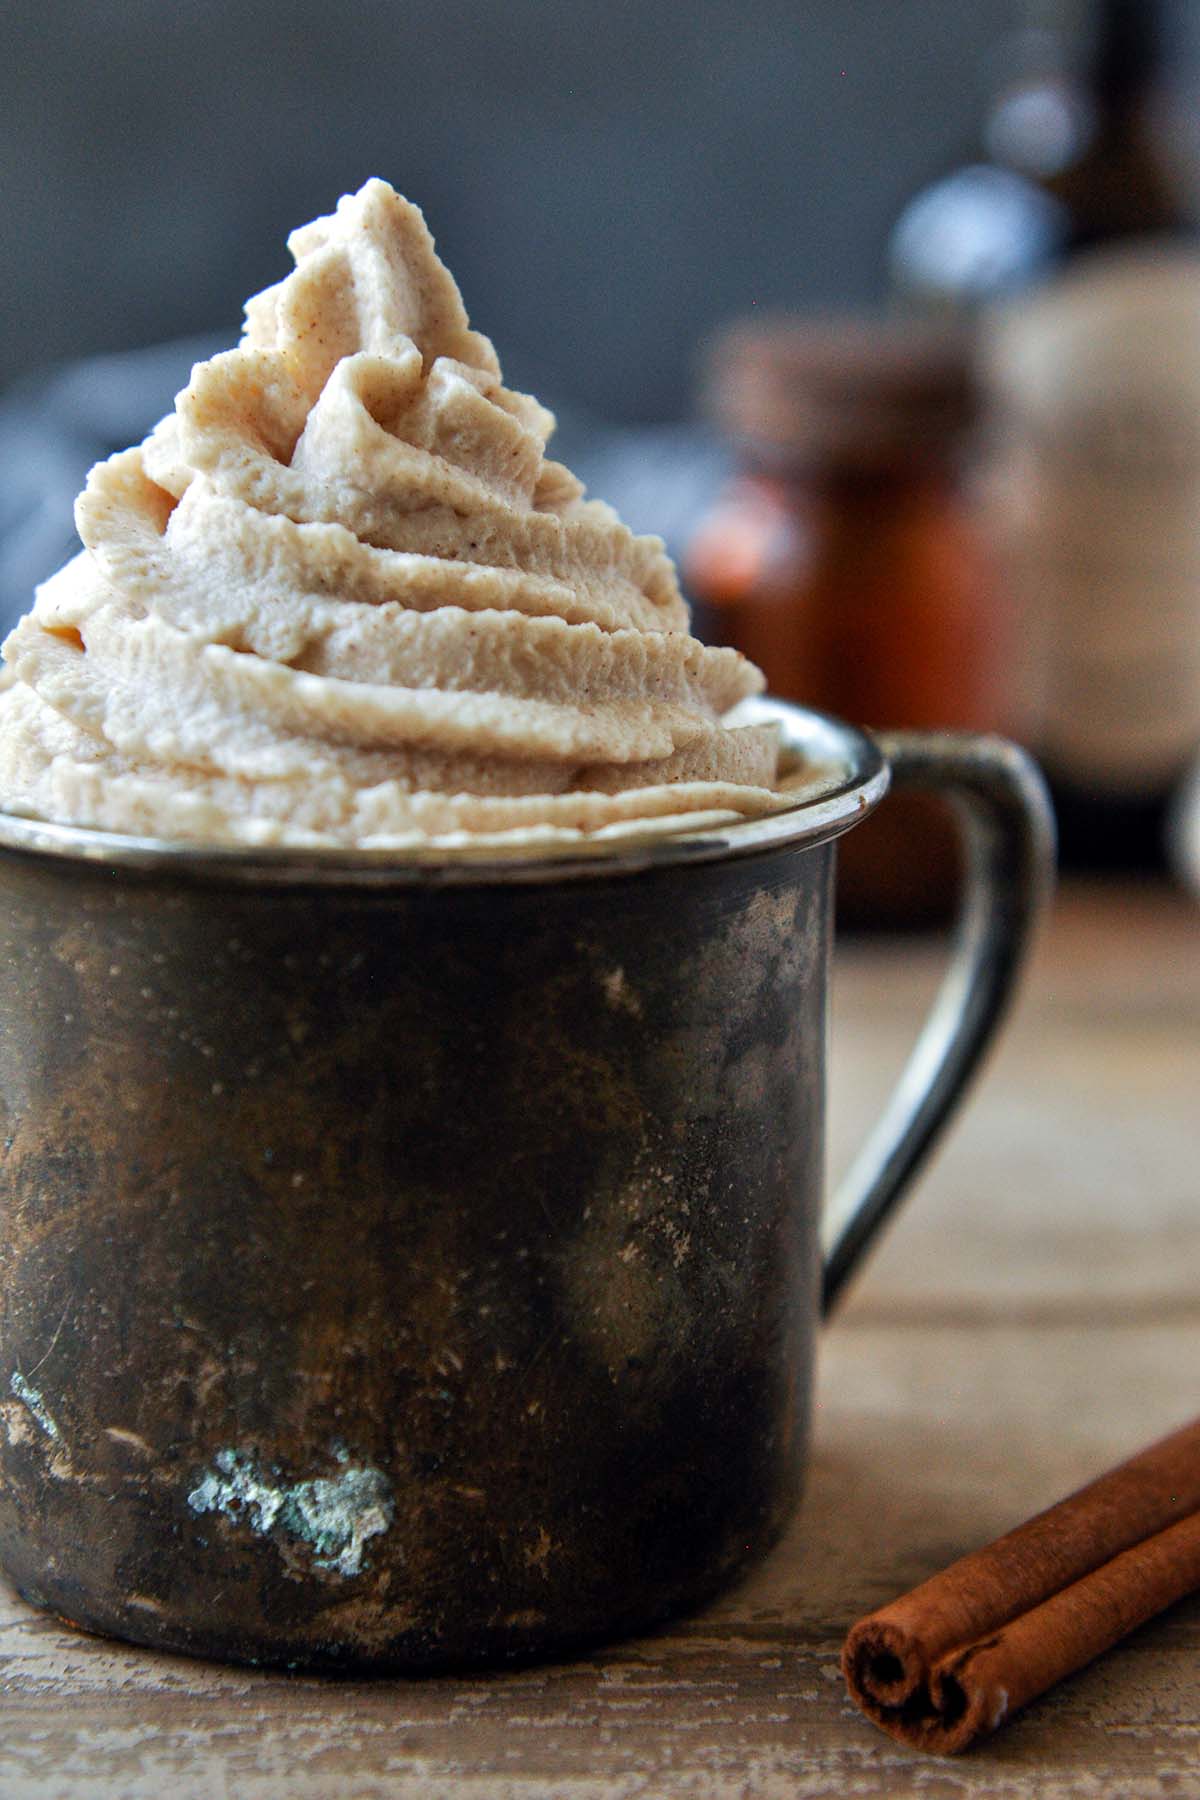 A very up close view of a metal cup filled with a swirl of cinnamon whipped cream, glass bottles in the background with a cinnamon stick up front.